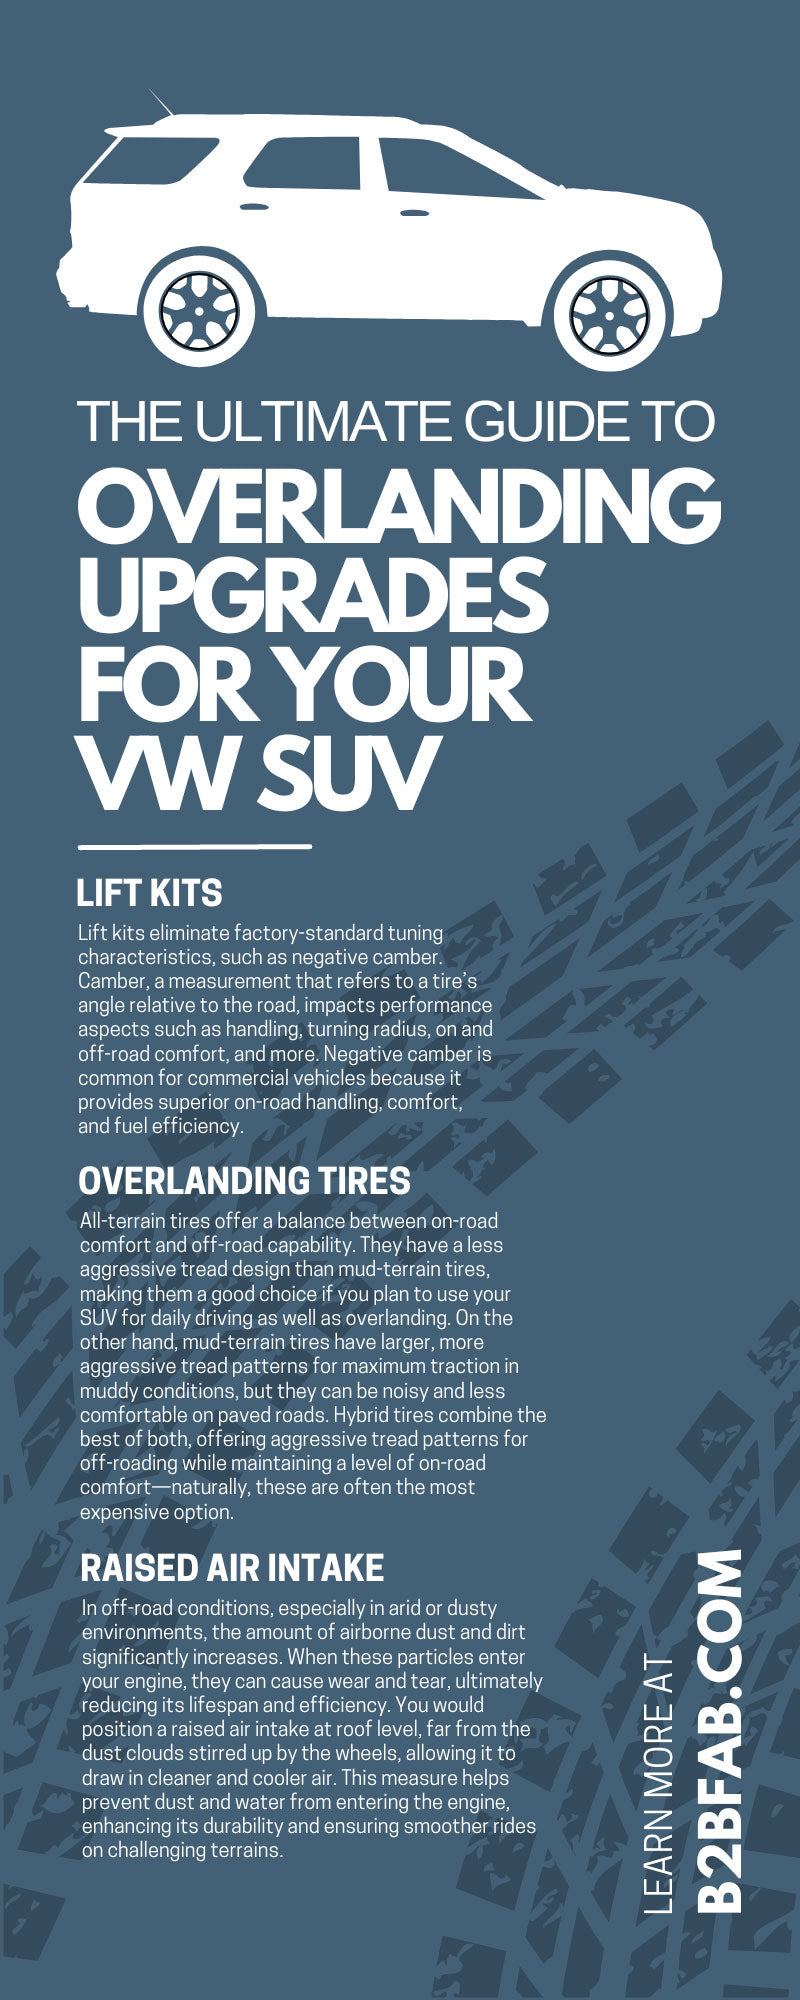 The Ultimate Guide to Overlanding Upgrades for Your VW SUV